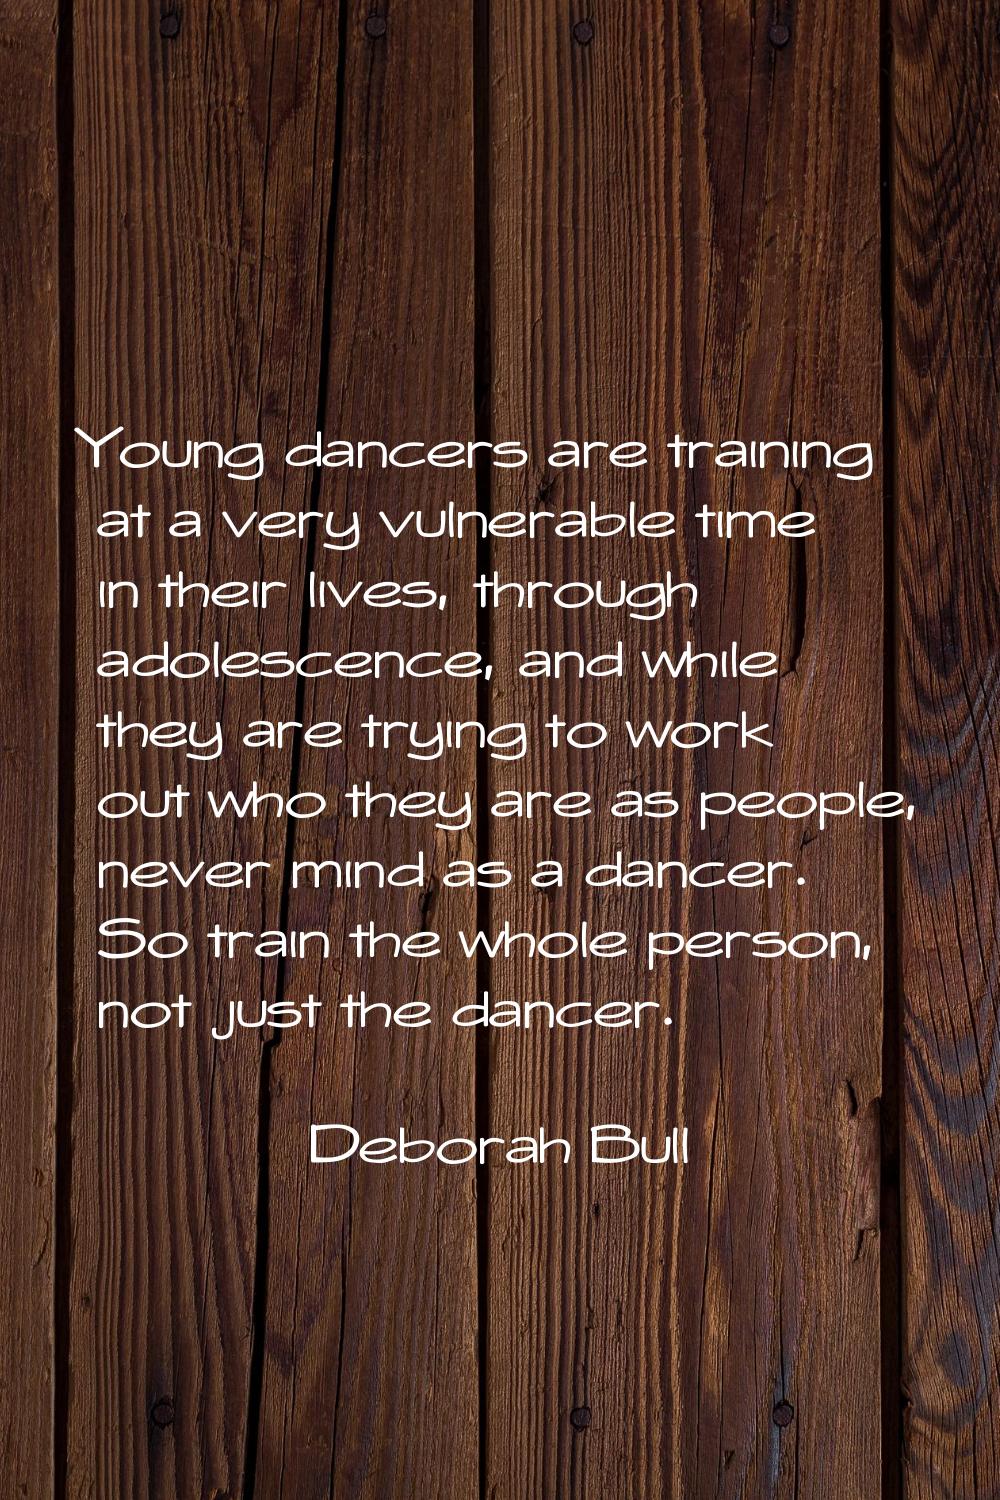 Young dancers are training at a very vulnerable time in their lives, through adolescence, and while